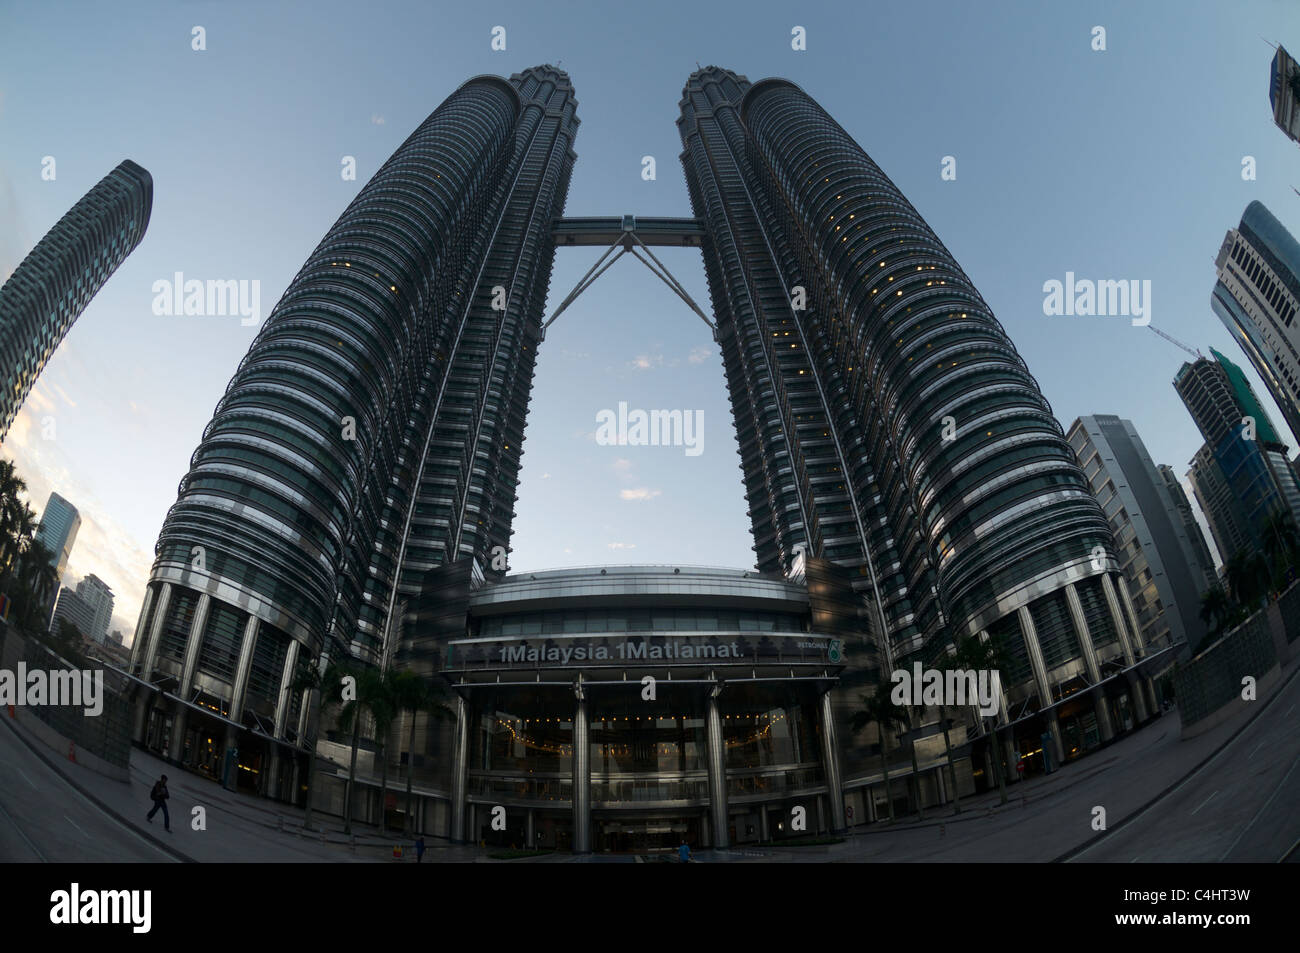 Petronas Towers Banque D'Images